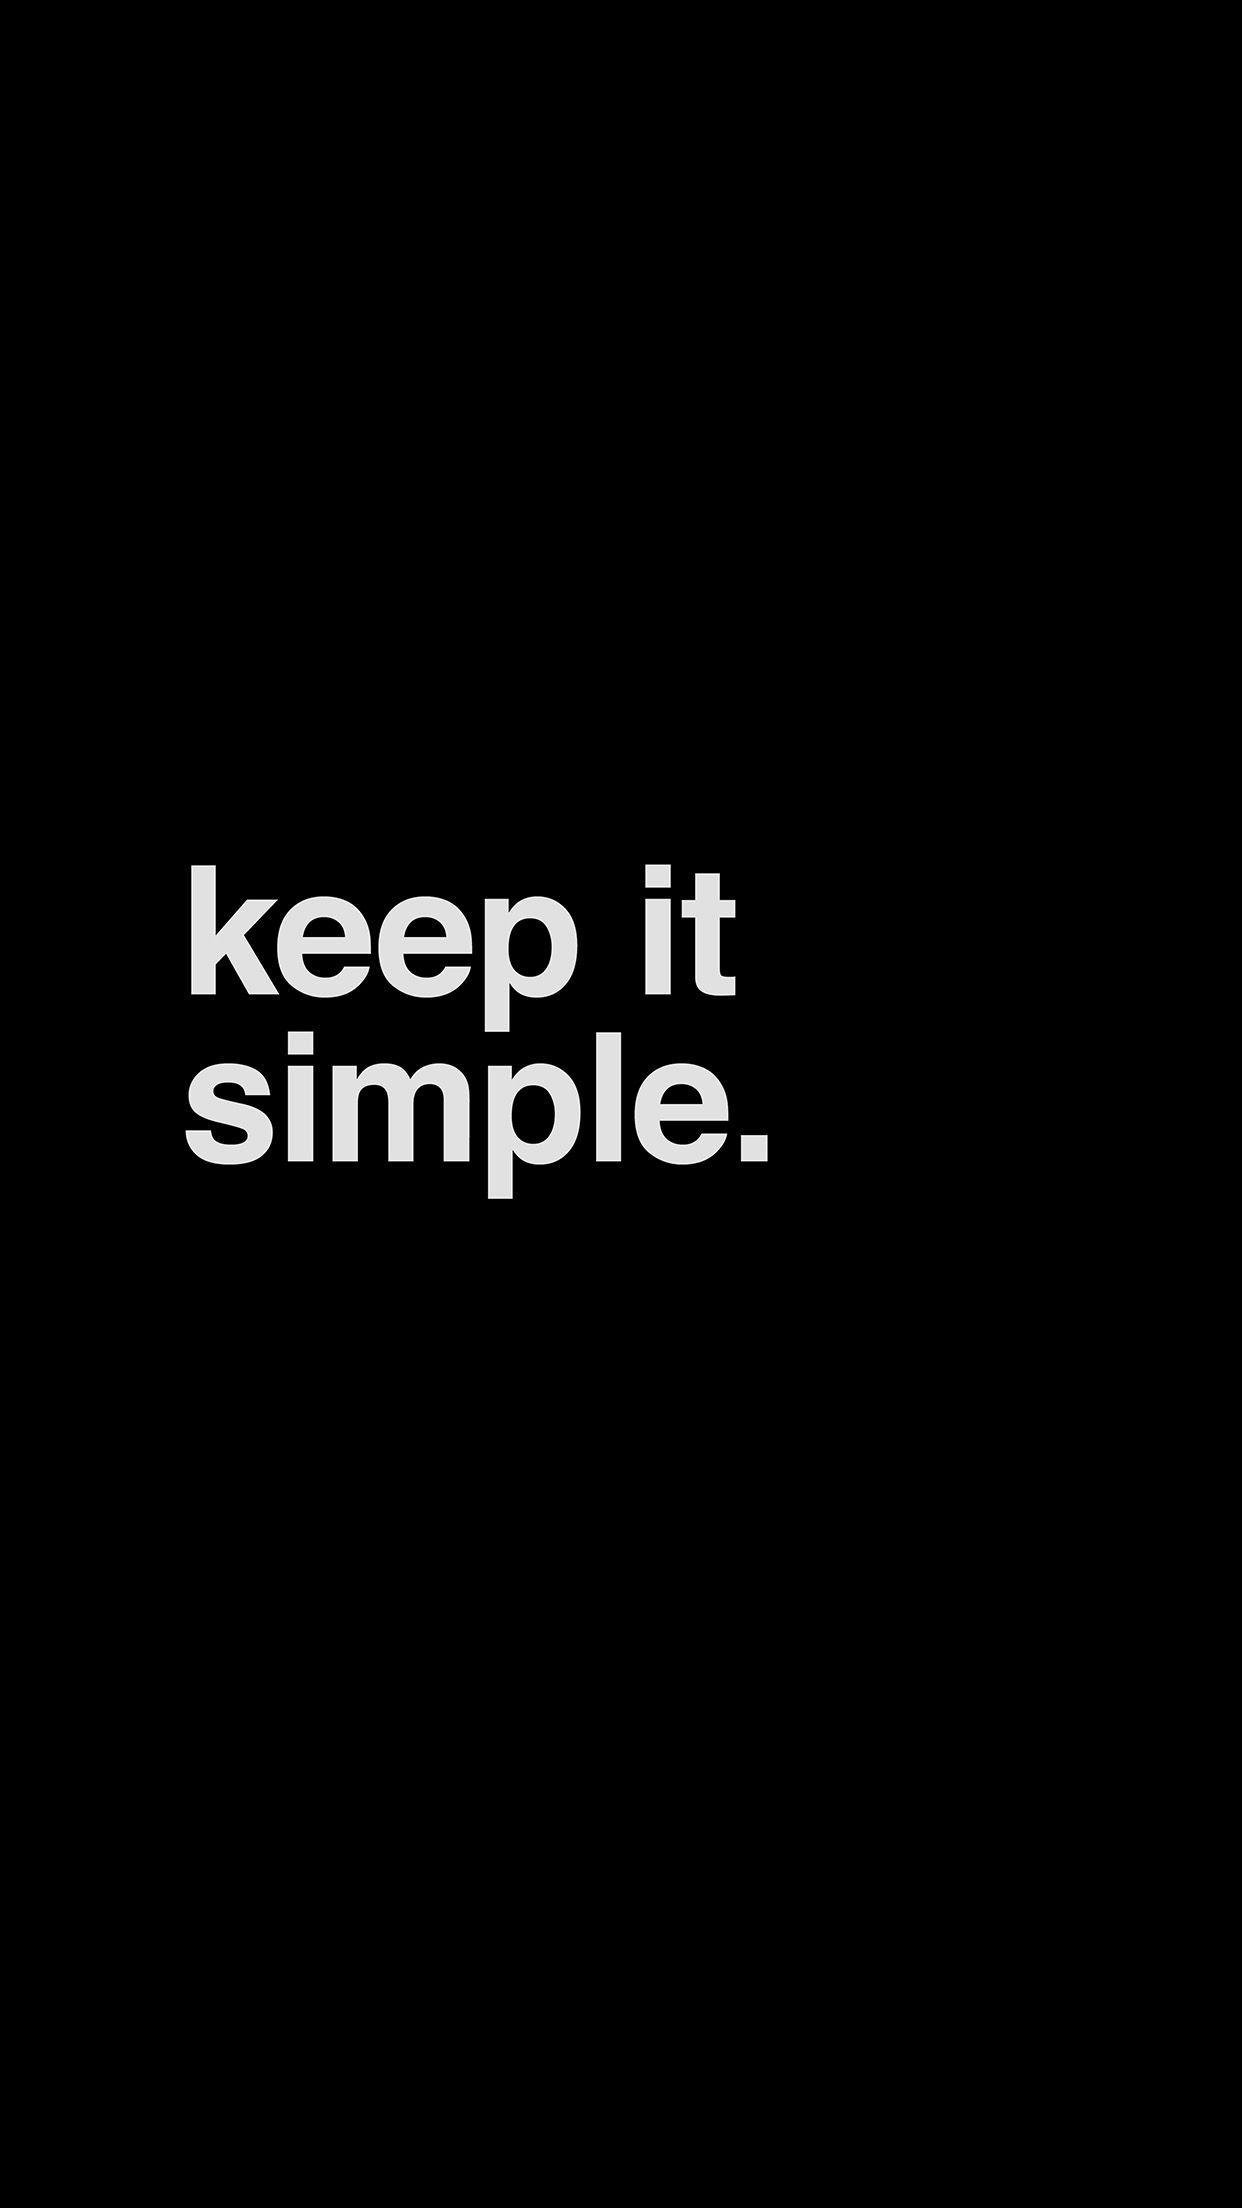 Keep It Simple Wallpapers - Top Free Keep It Simple Backgrounds